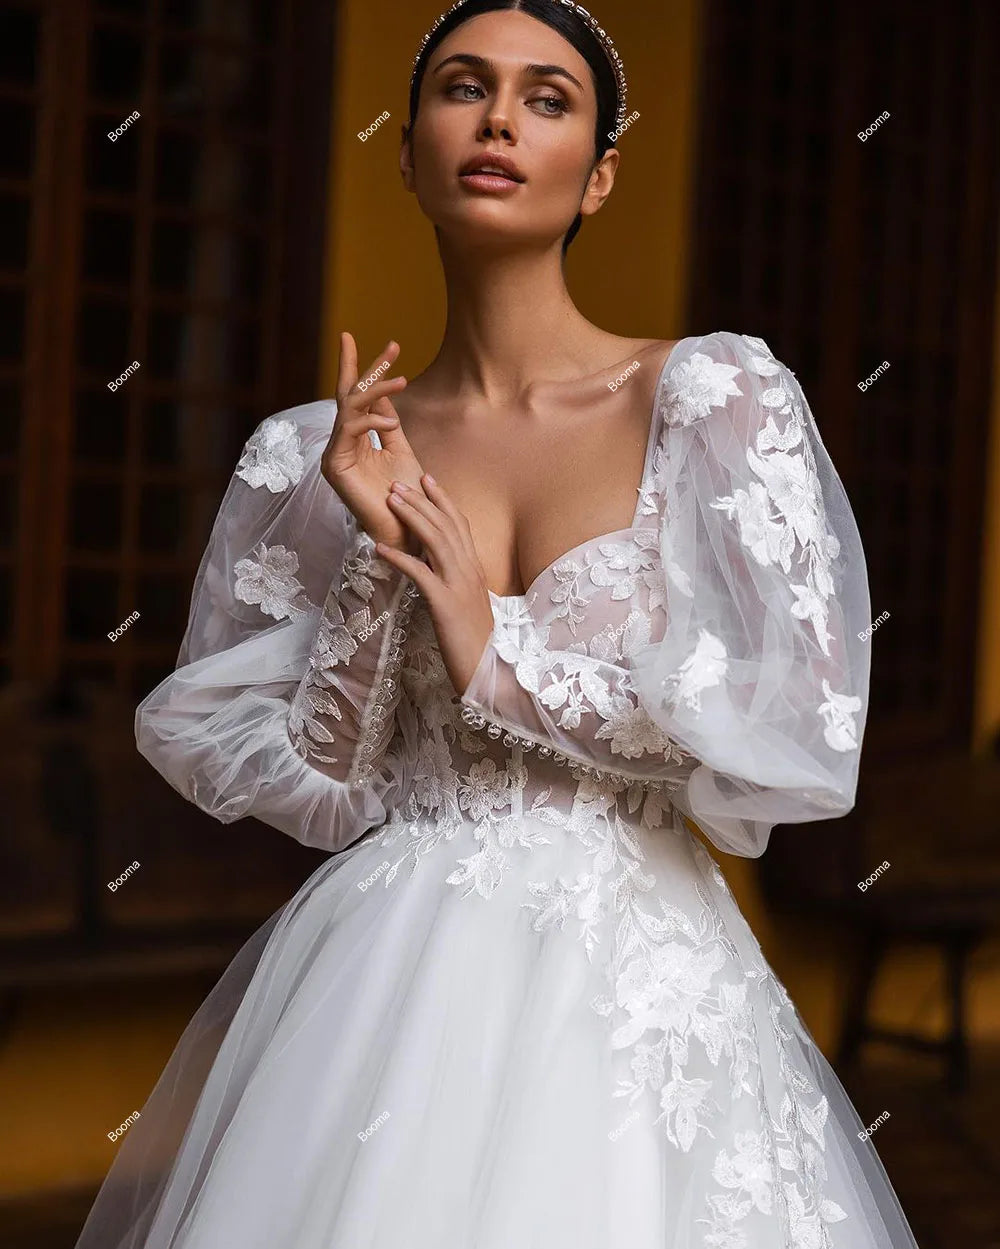 A-Line Elegant Wedding Dresses Sweetheart Long Puff Sleeves Appliques Brides Gowns Sweep Train Bridals Party Dresses